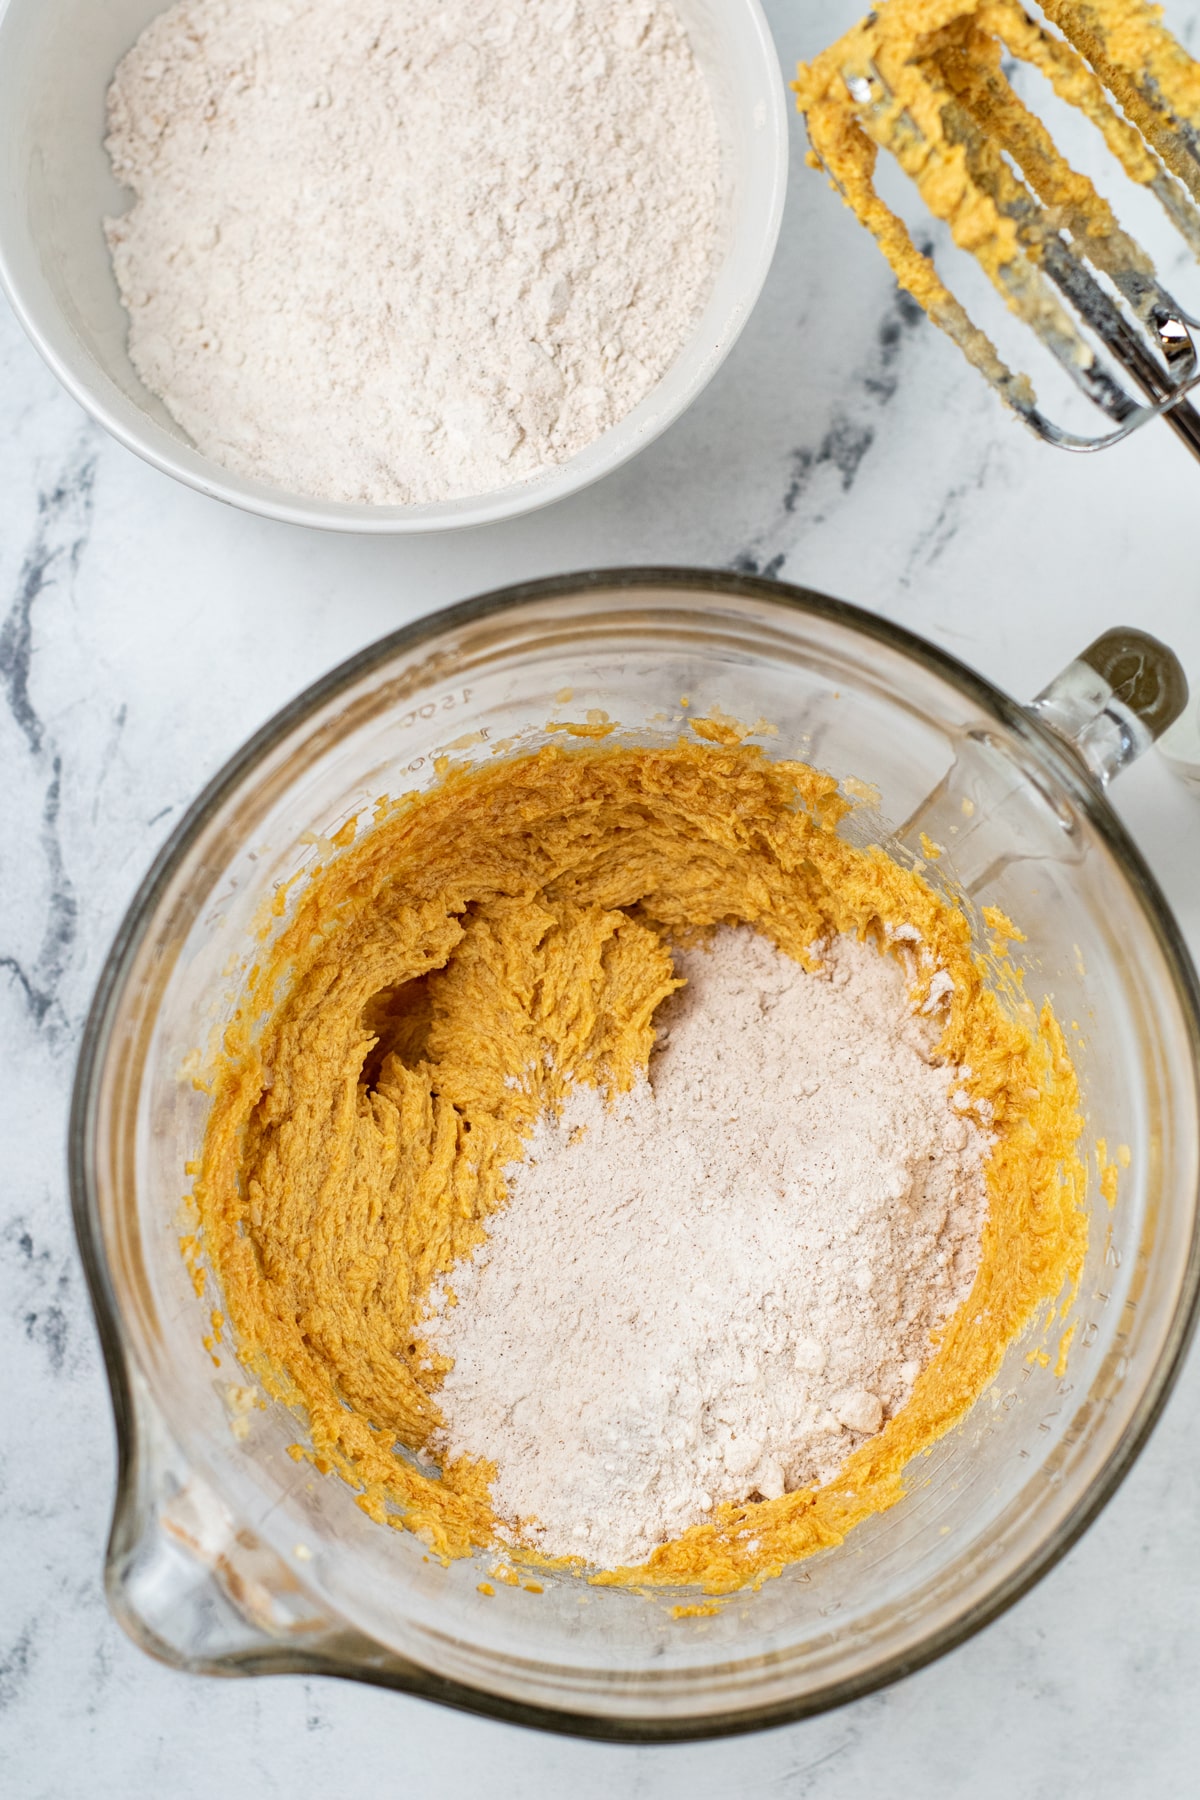 Another step in preparing pumpkin snickerdoodles is to add the flour mixture to the pumpkin mixture gradually